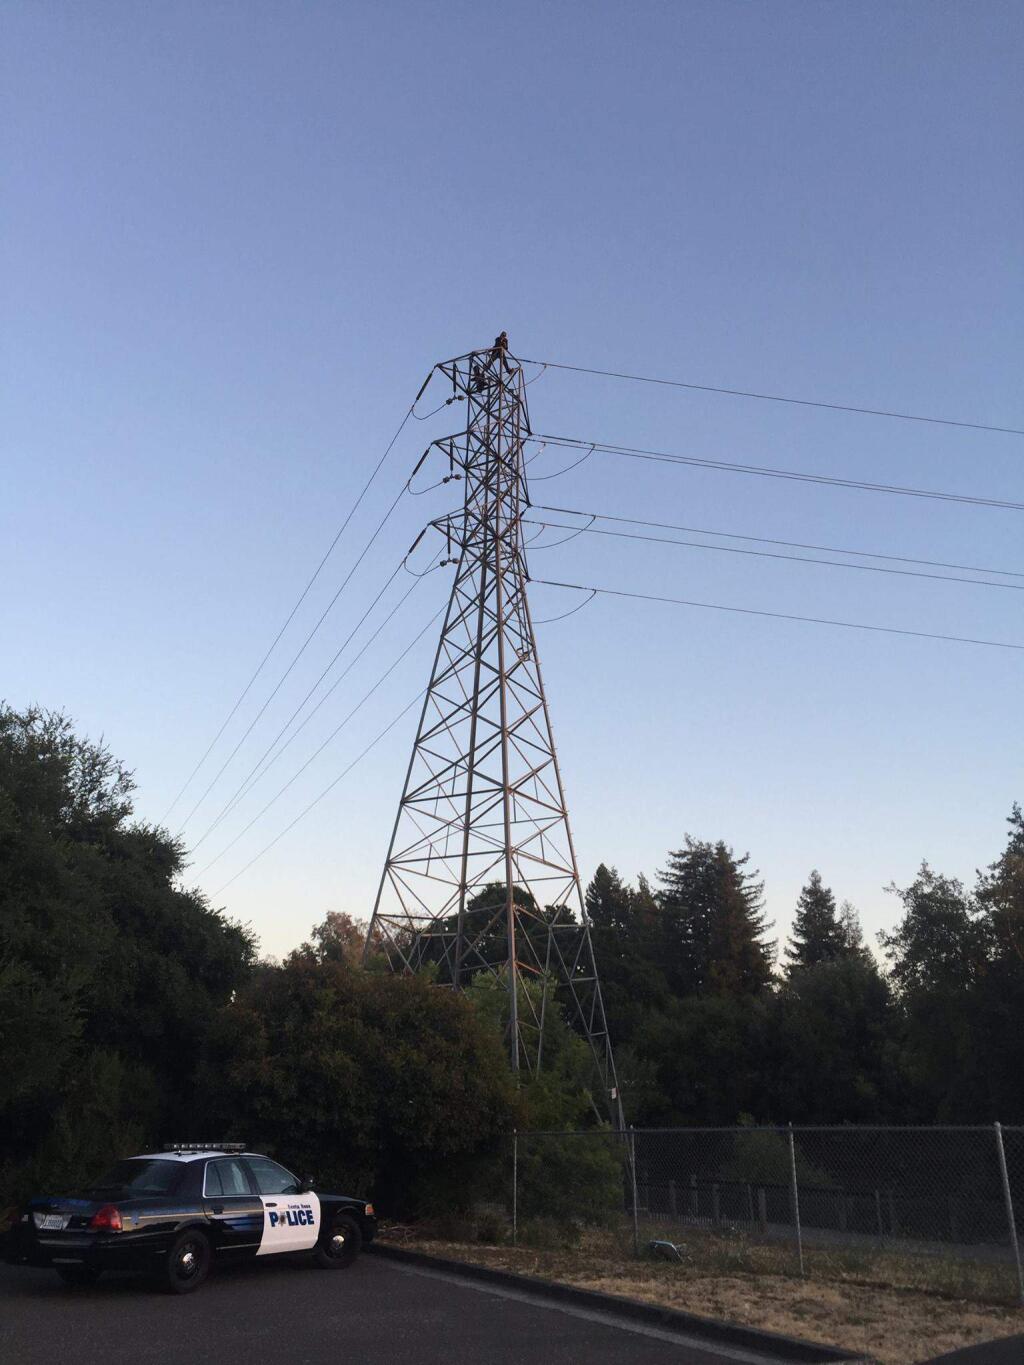 Santa Rosa police tried to convince a man to climb down from an electrical tower near Pierson Street and Santa Rosa Creek west of Highway 101 on Wednesday, June 29, 2016. ( SANTA ROSE POLICE DEPARTMENT )